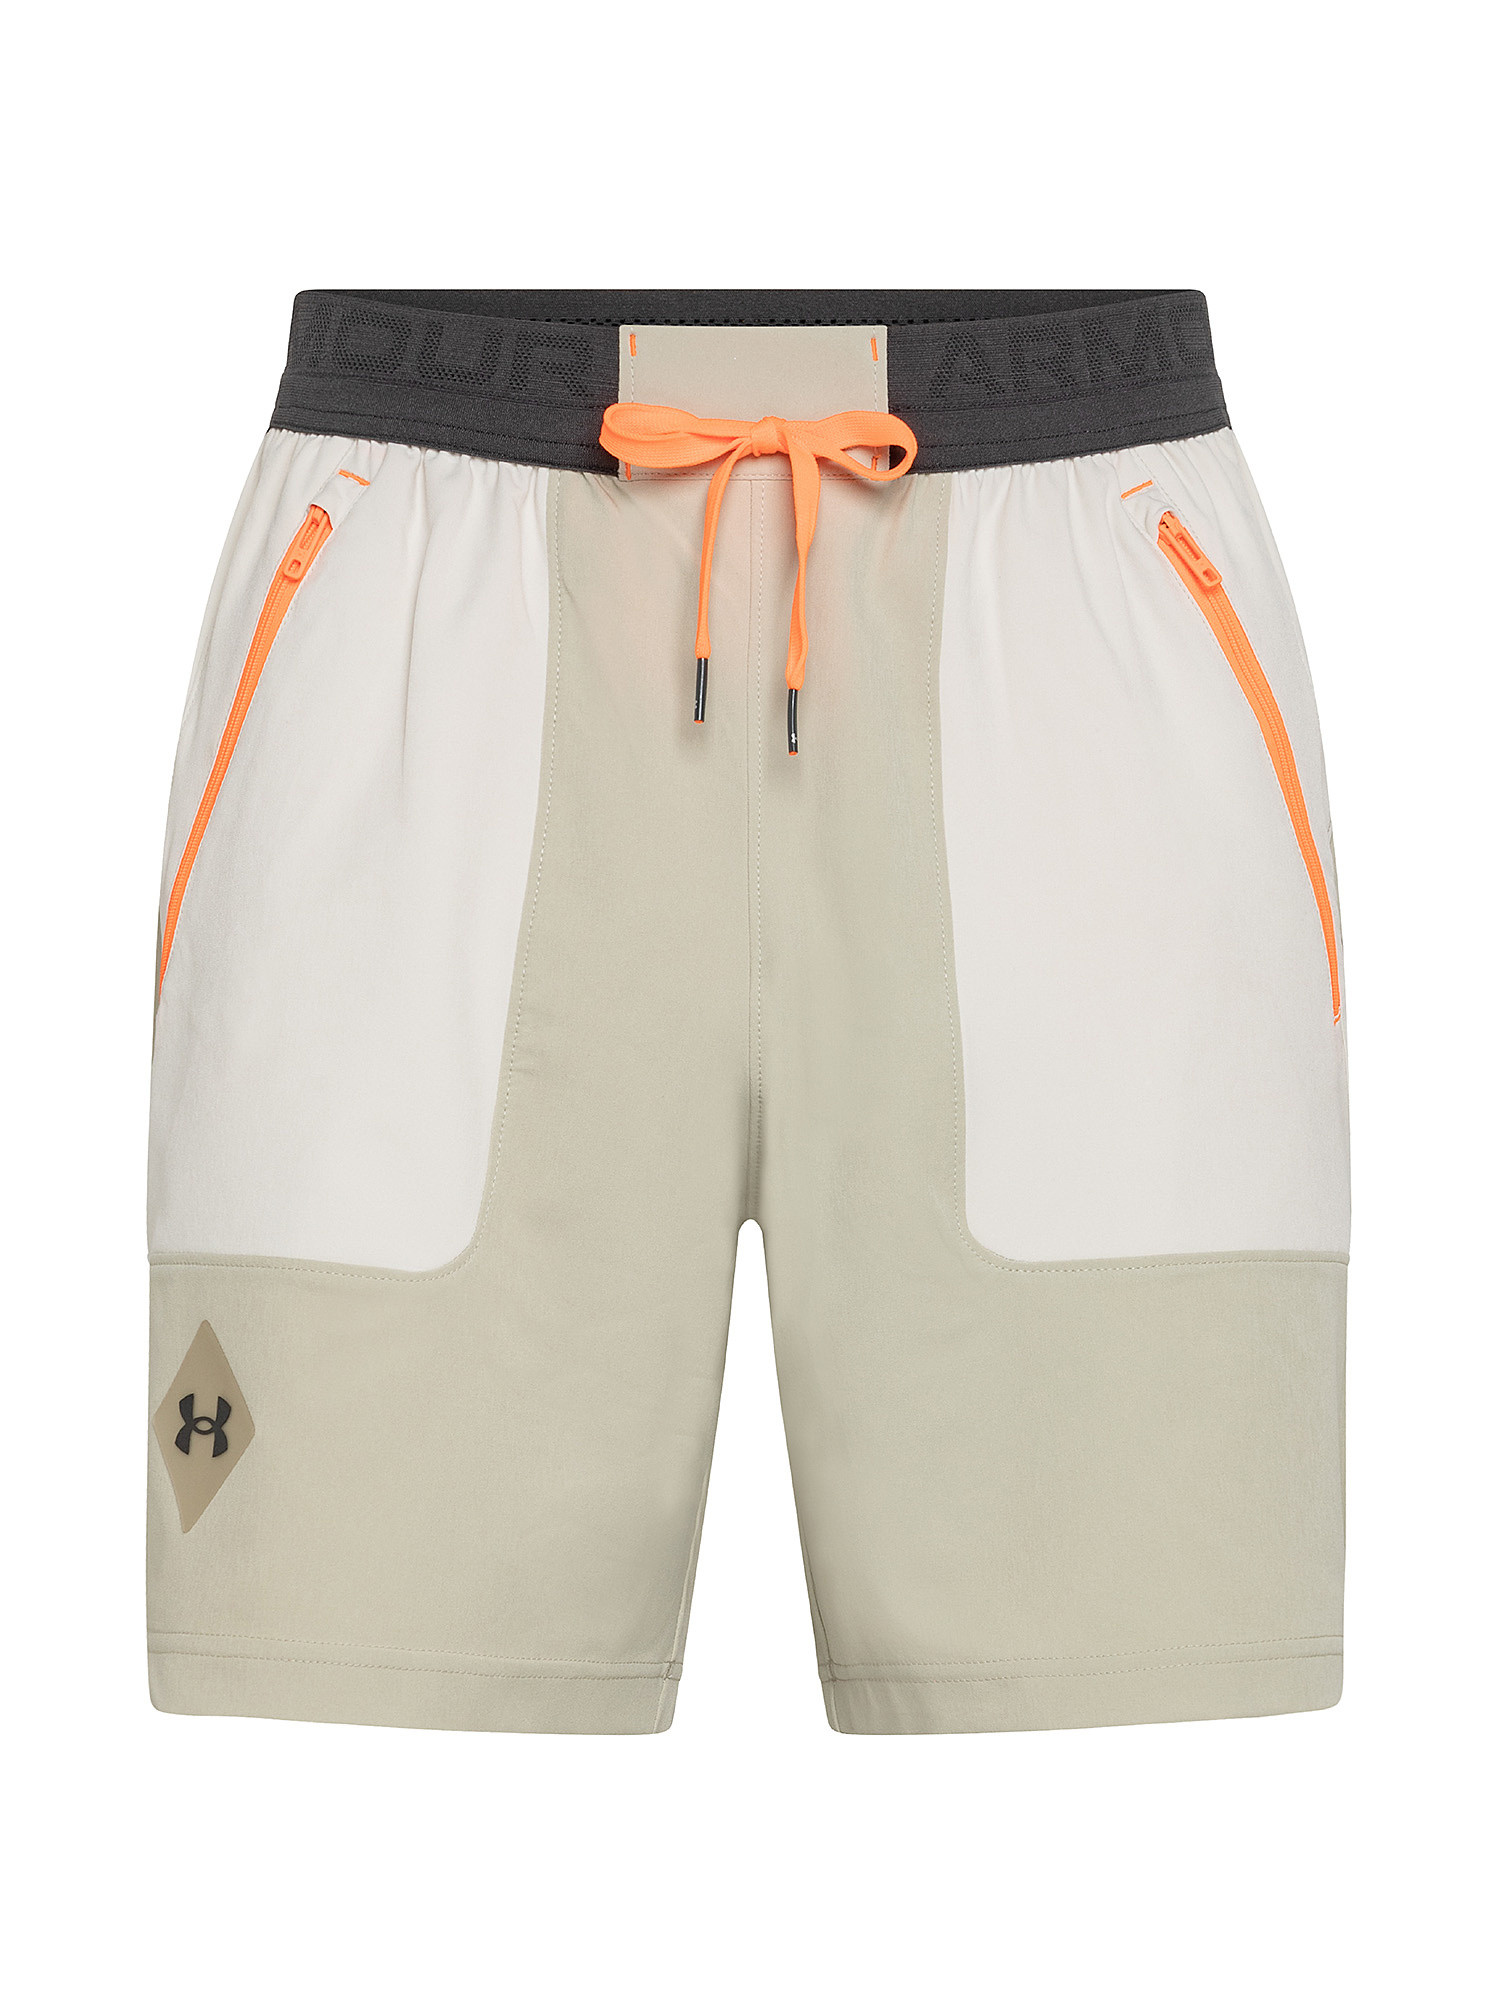 Shorts UA Rival Terry, Beige, large image number 0